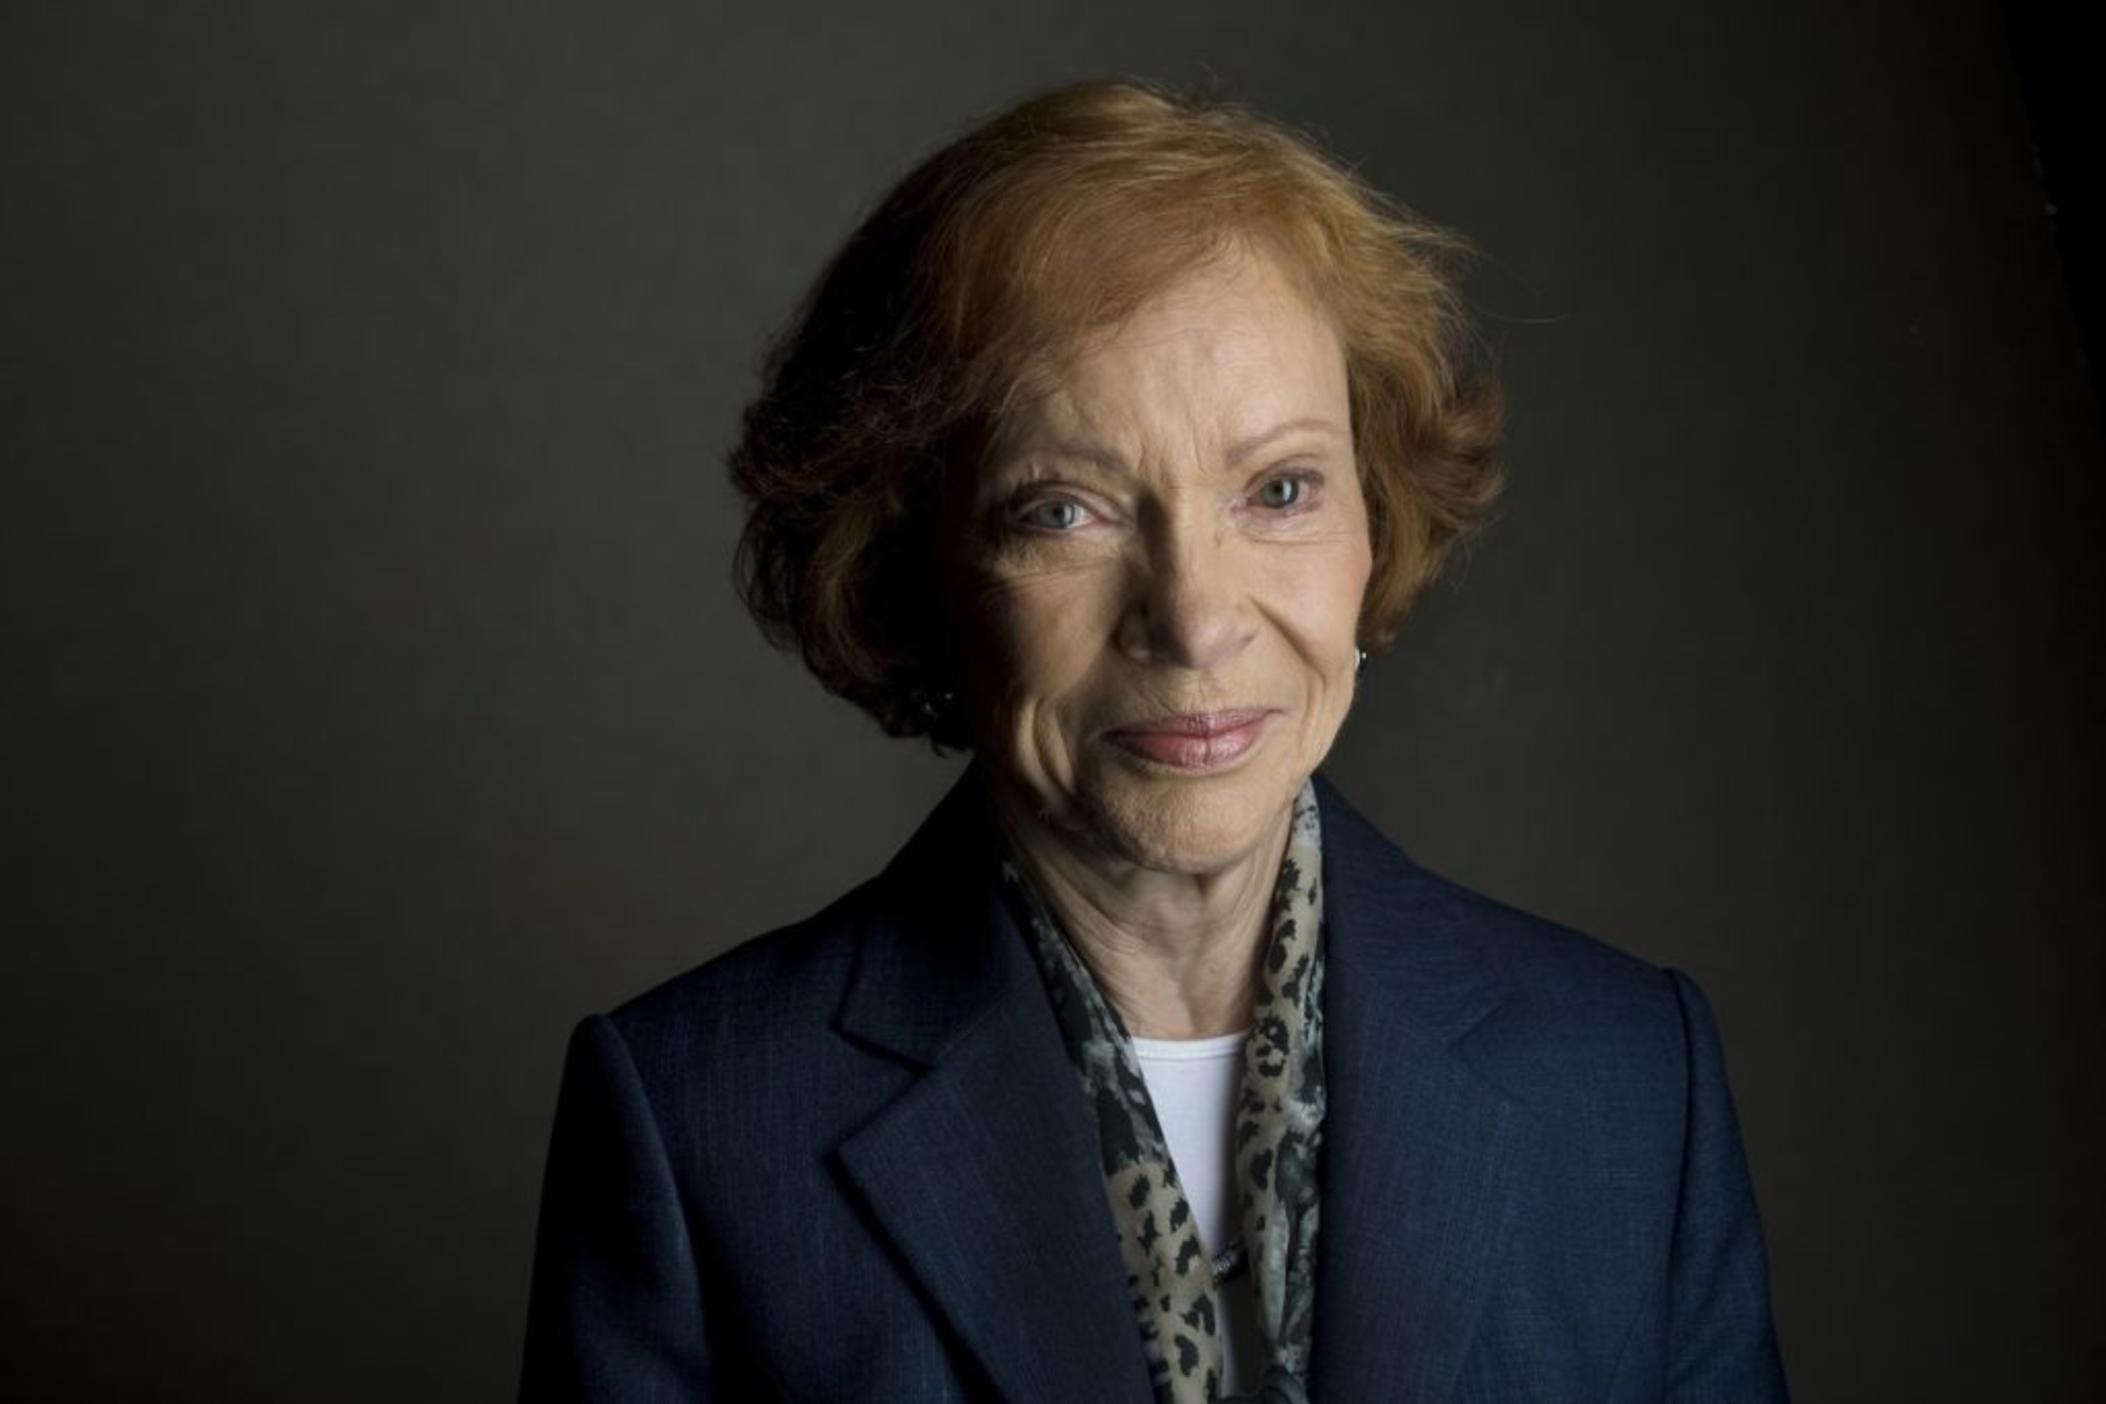 Rosalynn Carter, former first lady of the United States, died on Nov. 19, 2023 in Plains, Ga. She was 96. Memorial events honoring her life and work will be held in Atlanta and Sumter County, Ga. Nov. 27 to 29.